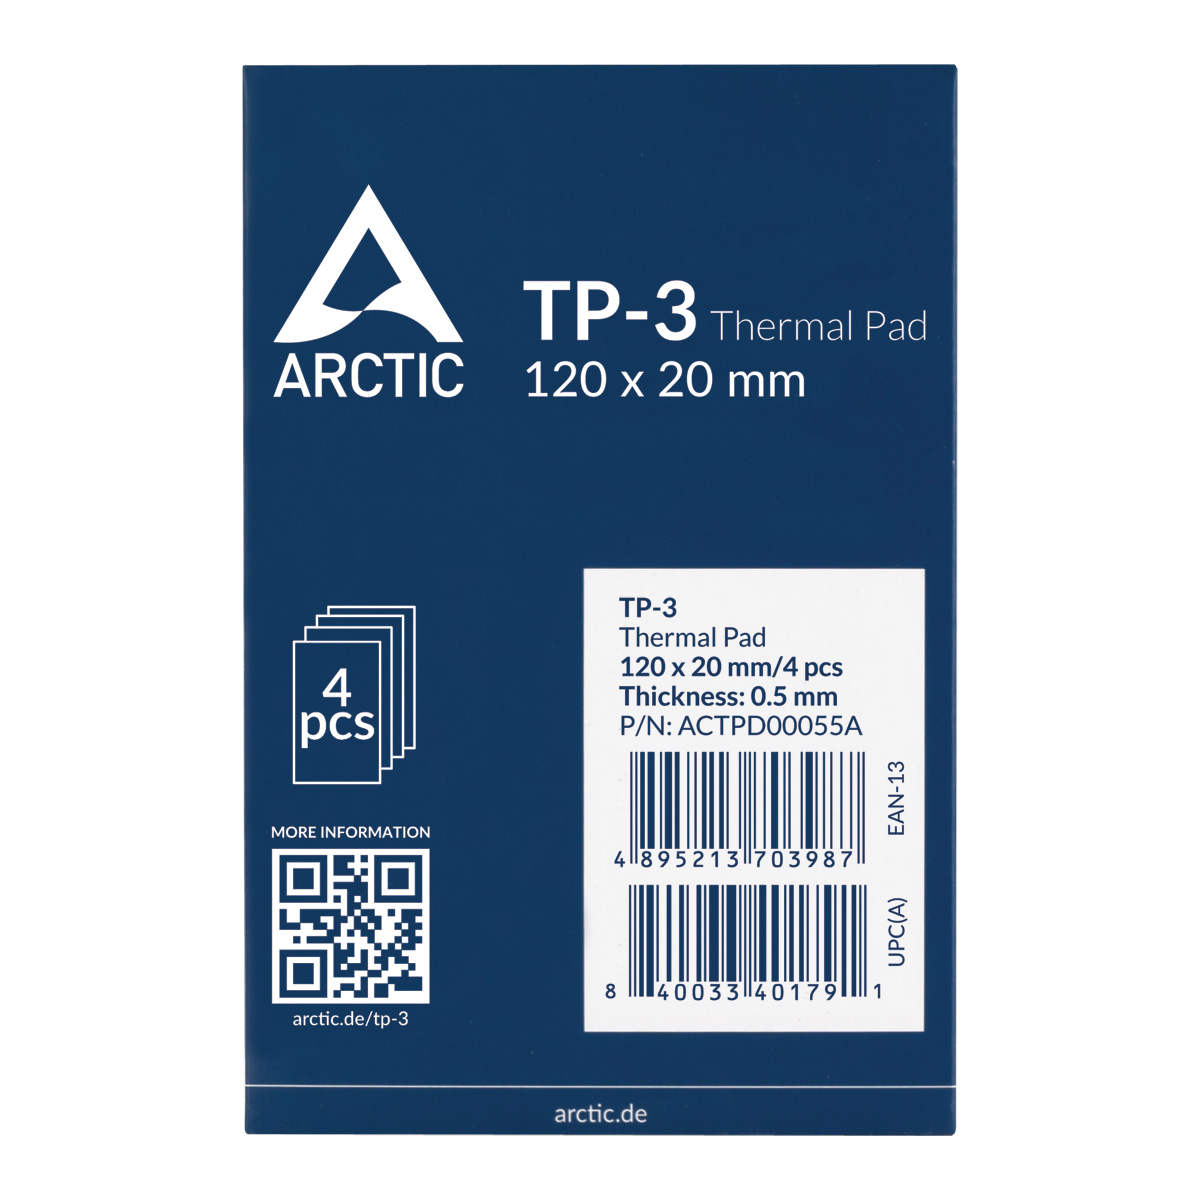 TP-3_120x20mm_0.5mm_Packaging